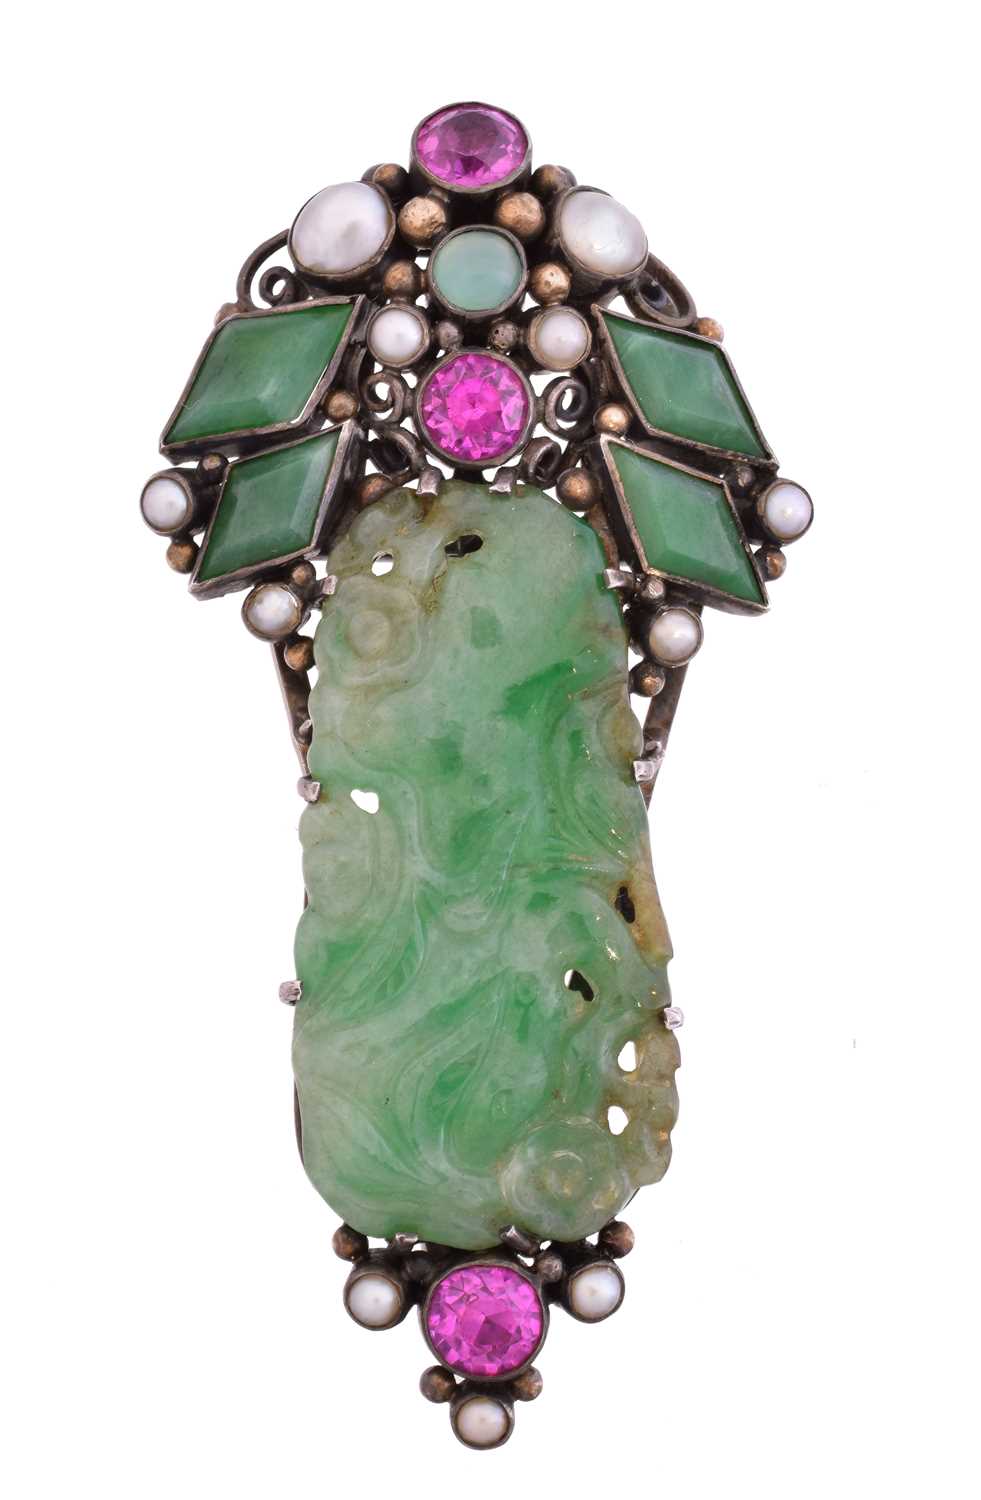 Lot 8 - A jade and gem-set silver clip brooch attributed to Dorrie Nossiter